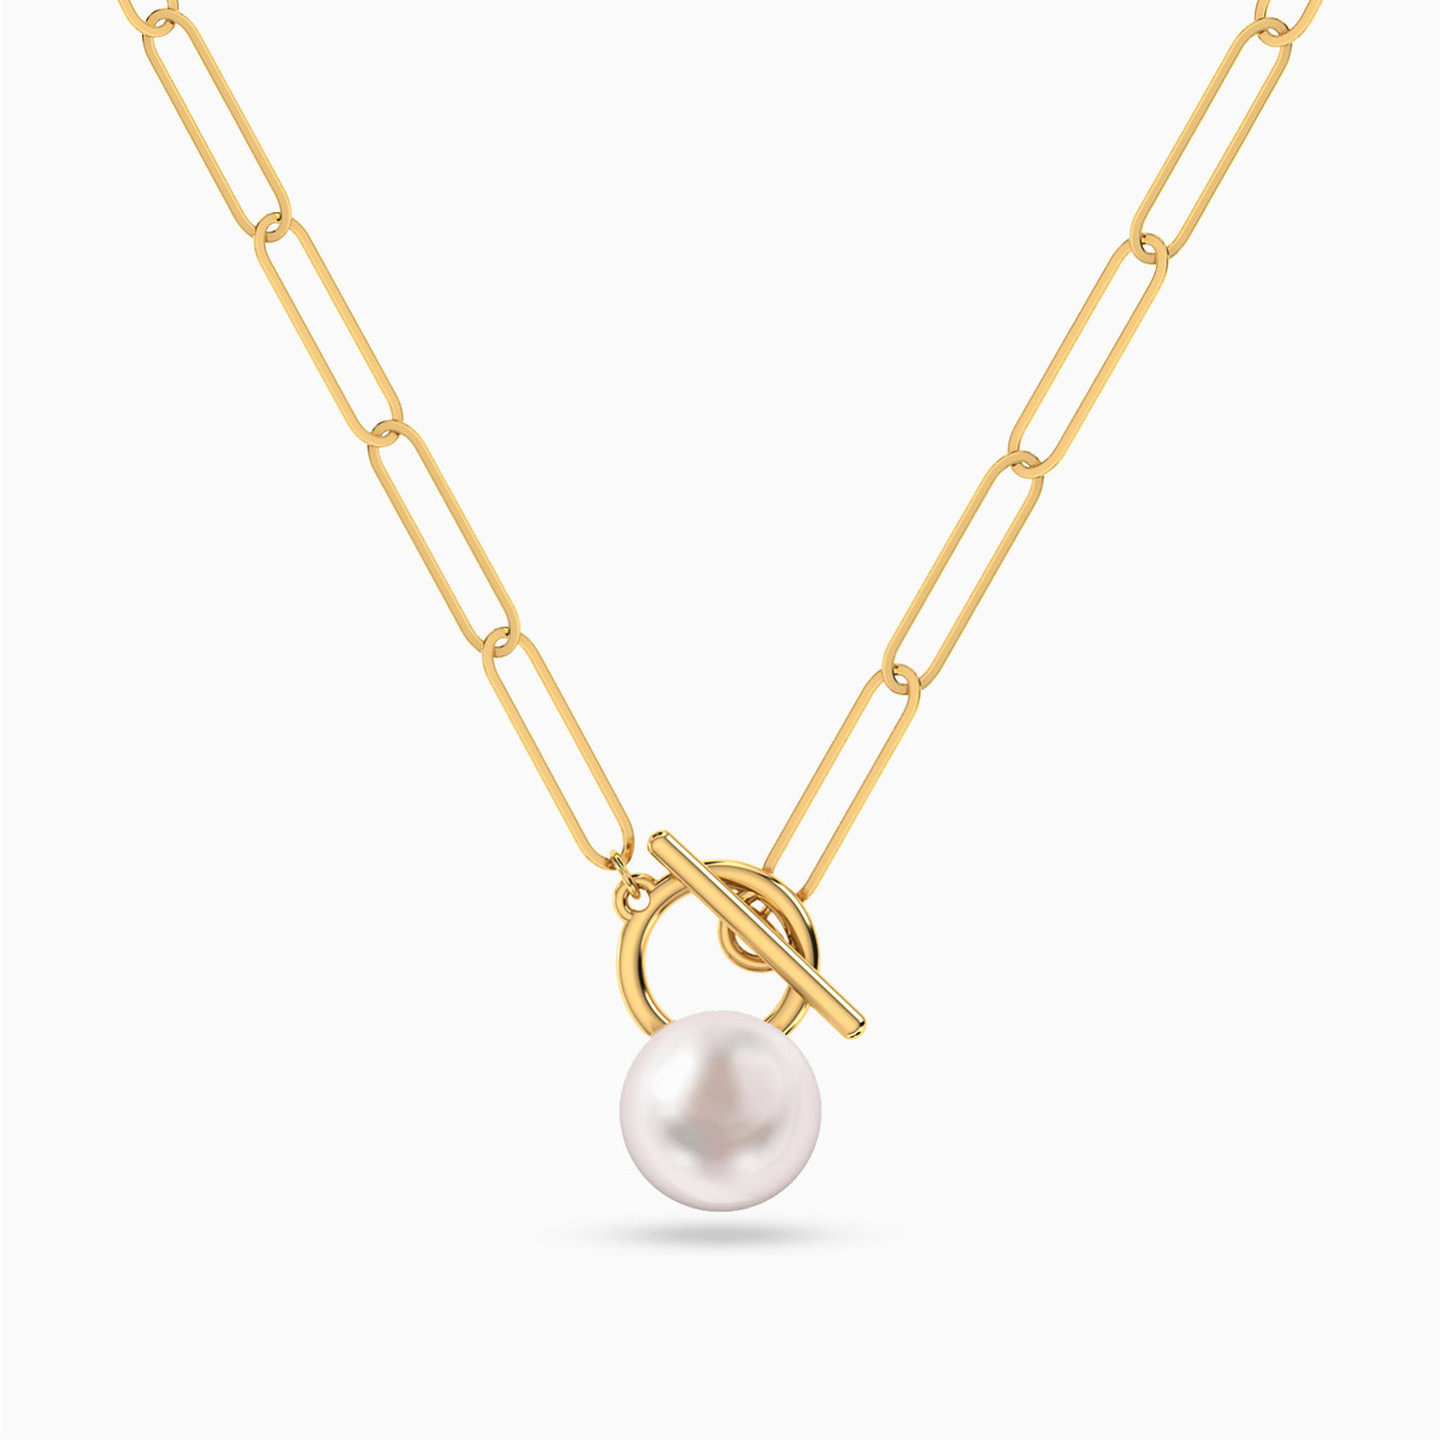 18K Gold Pearls Pendant Necklace - 4